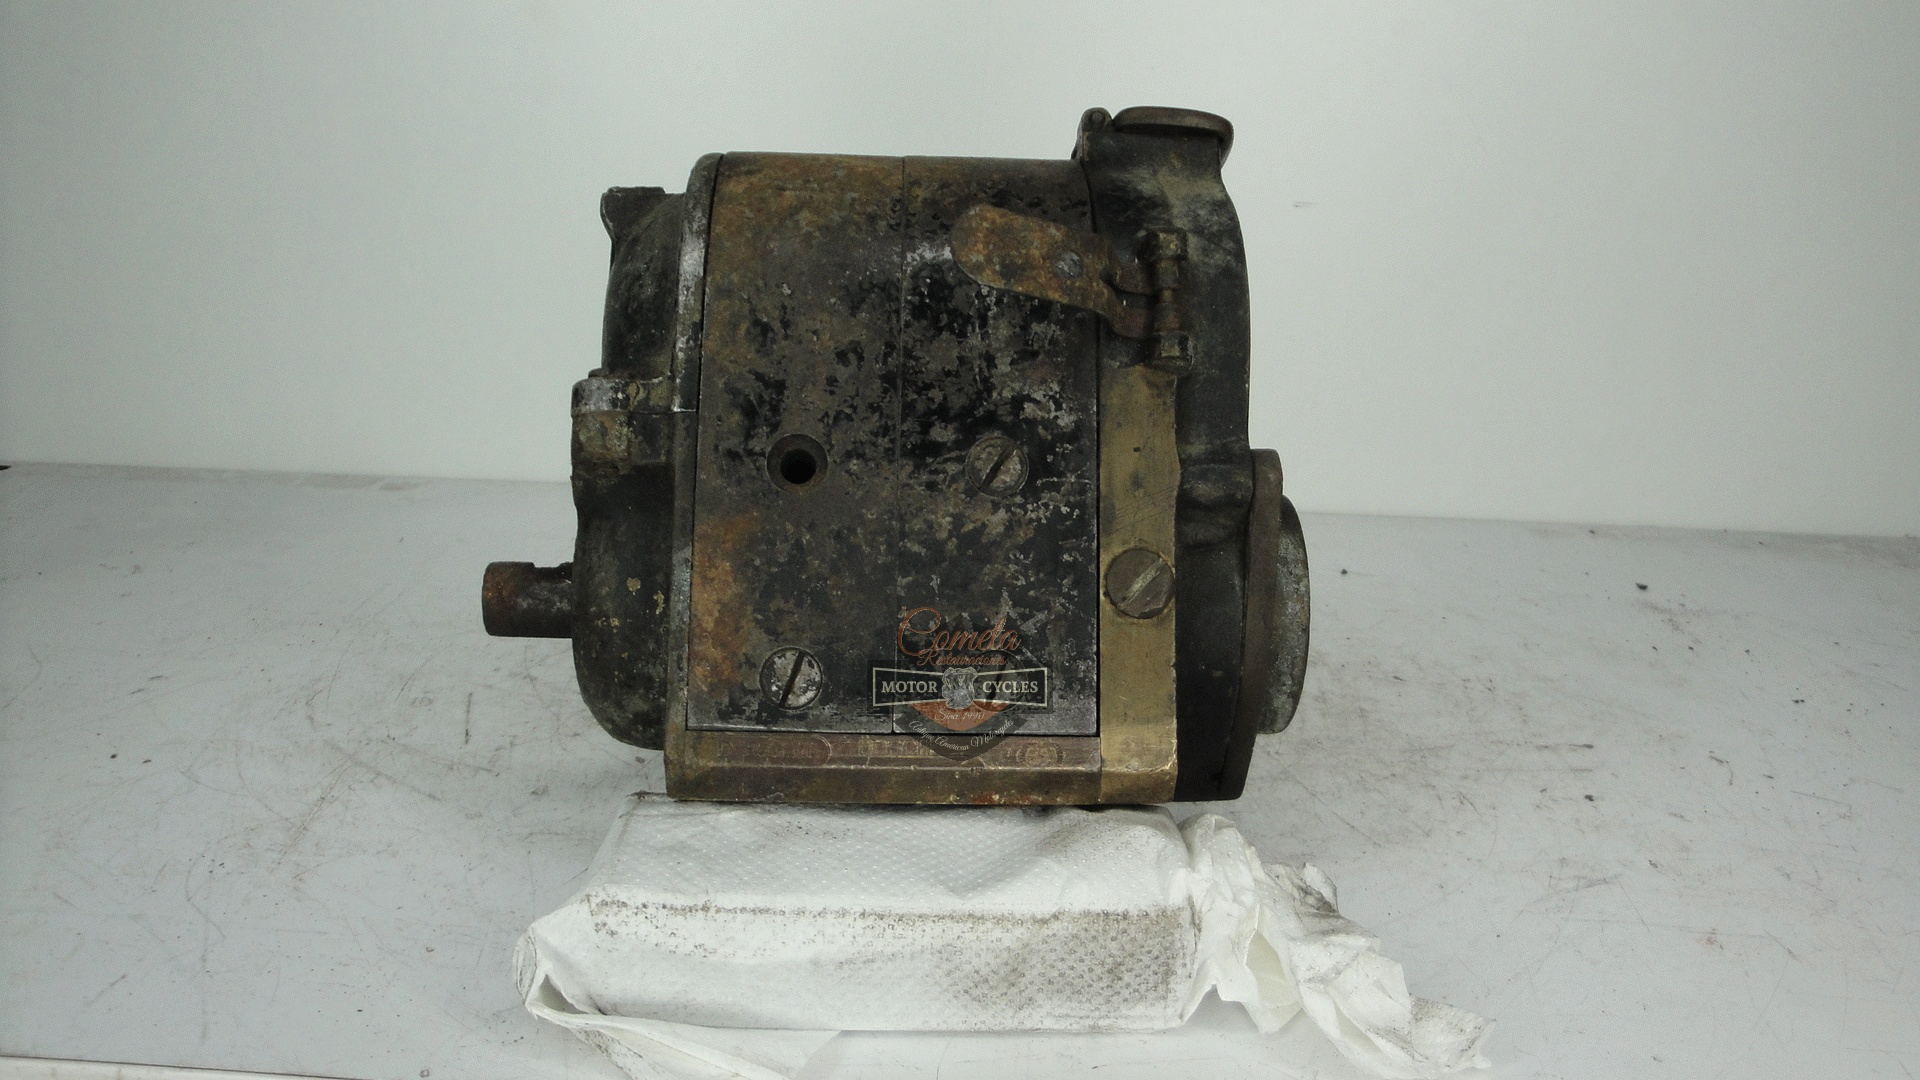 MAGNETO BOSCH TYPE ZF4 COCHE / CAMION / TRACTOR / AÑOS 1920 / 1930 / 1940 !